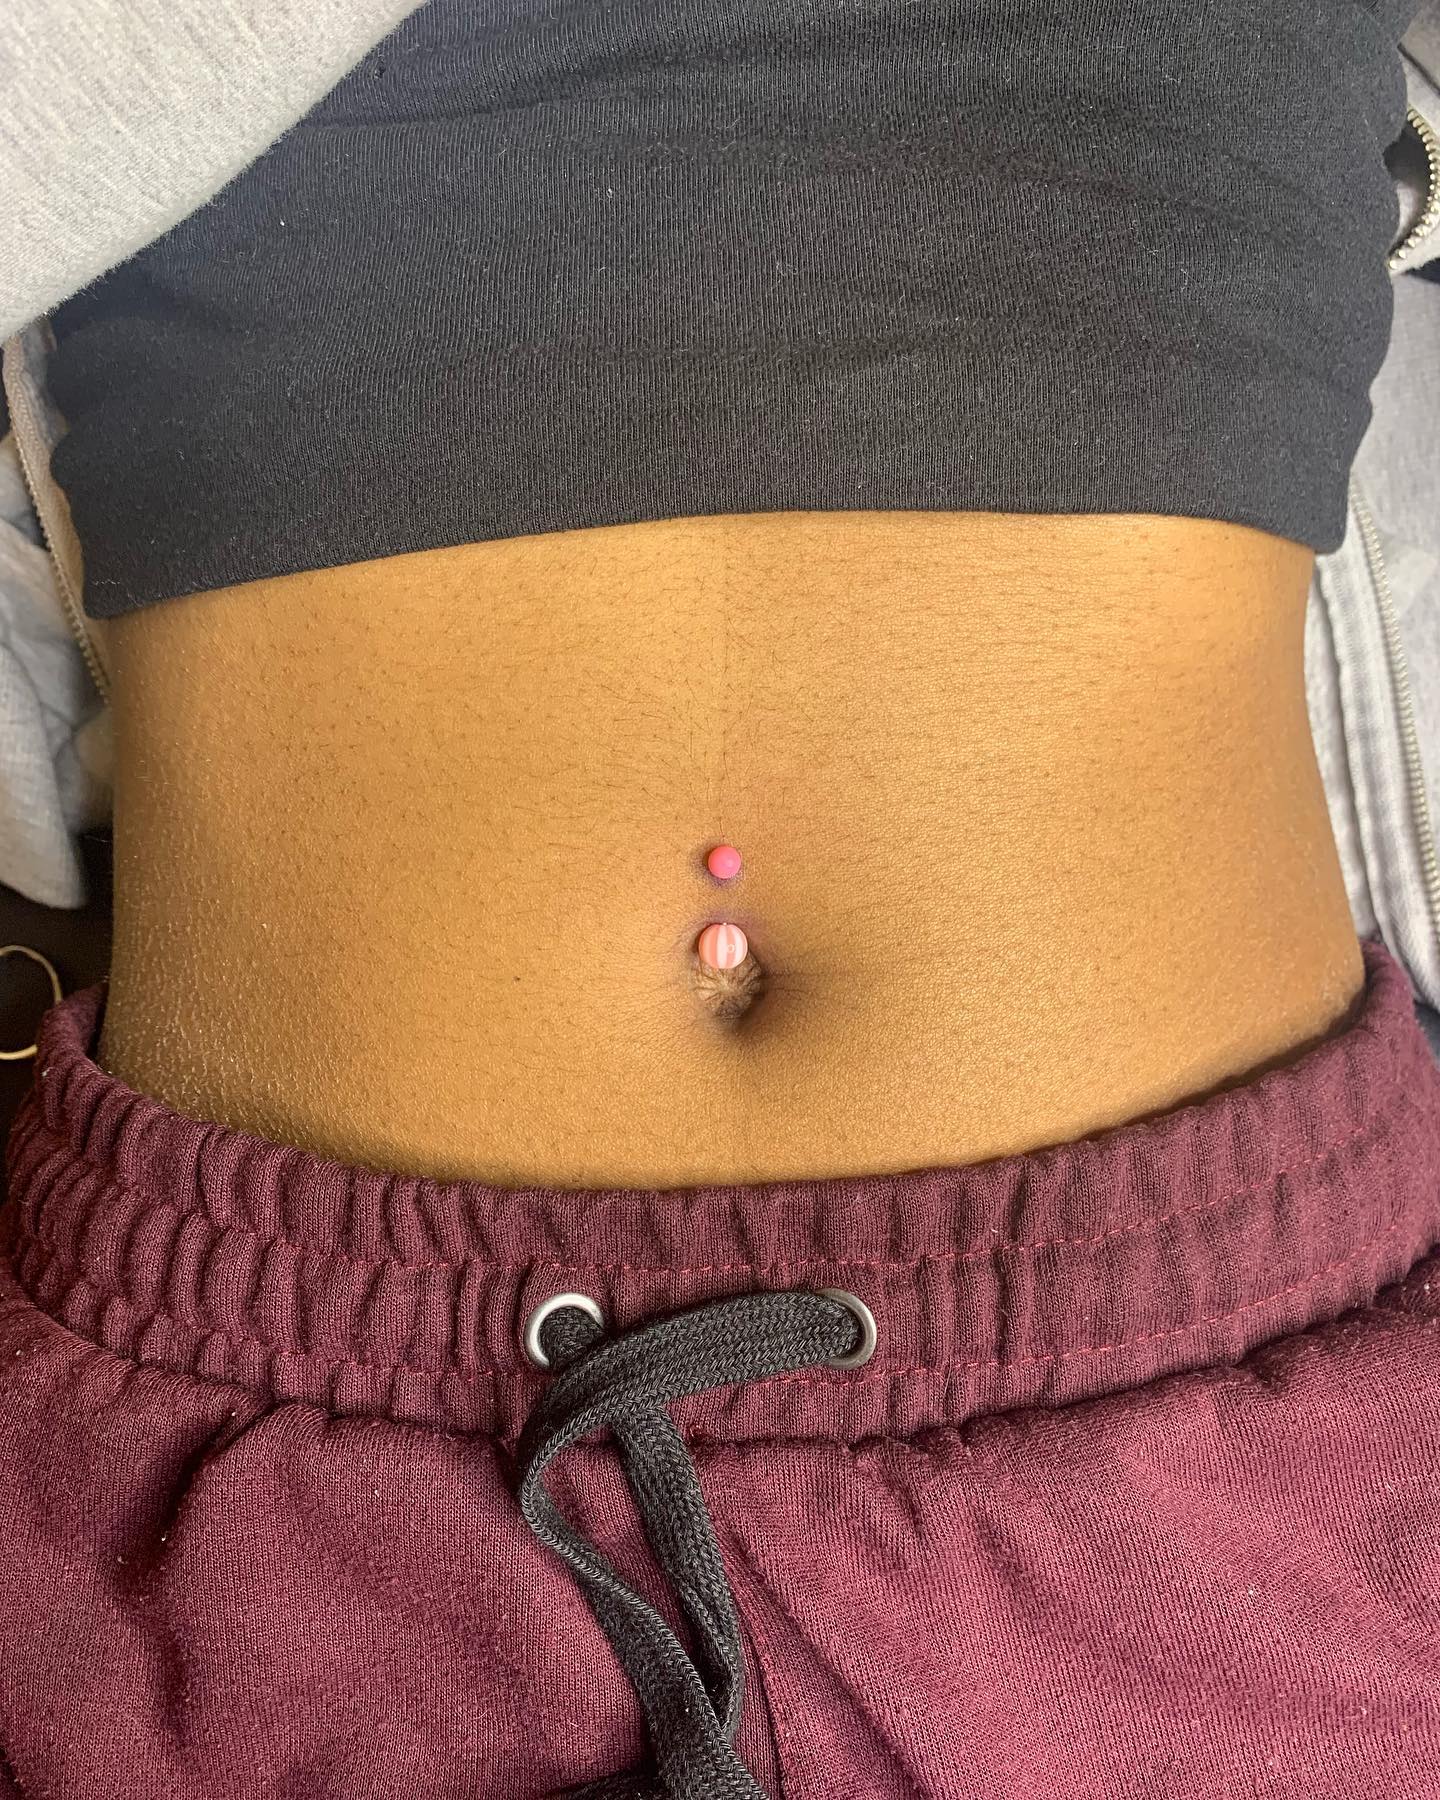 A Few Piercings From My Fridays $25 Sale. Come Get Them Now🗓️ #chicagopiercing #chicagotattooartist #femaletattooartist #blackfemaleartist #blackfemaleentrepreneurs #piercings #explorepage #booknow